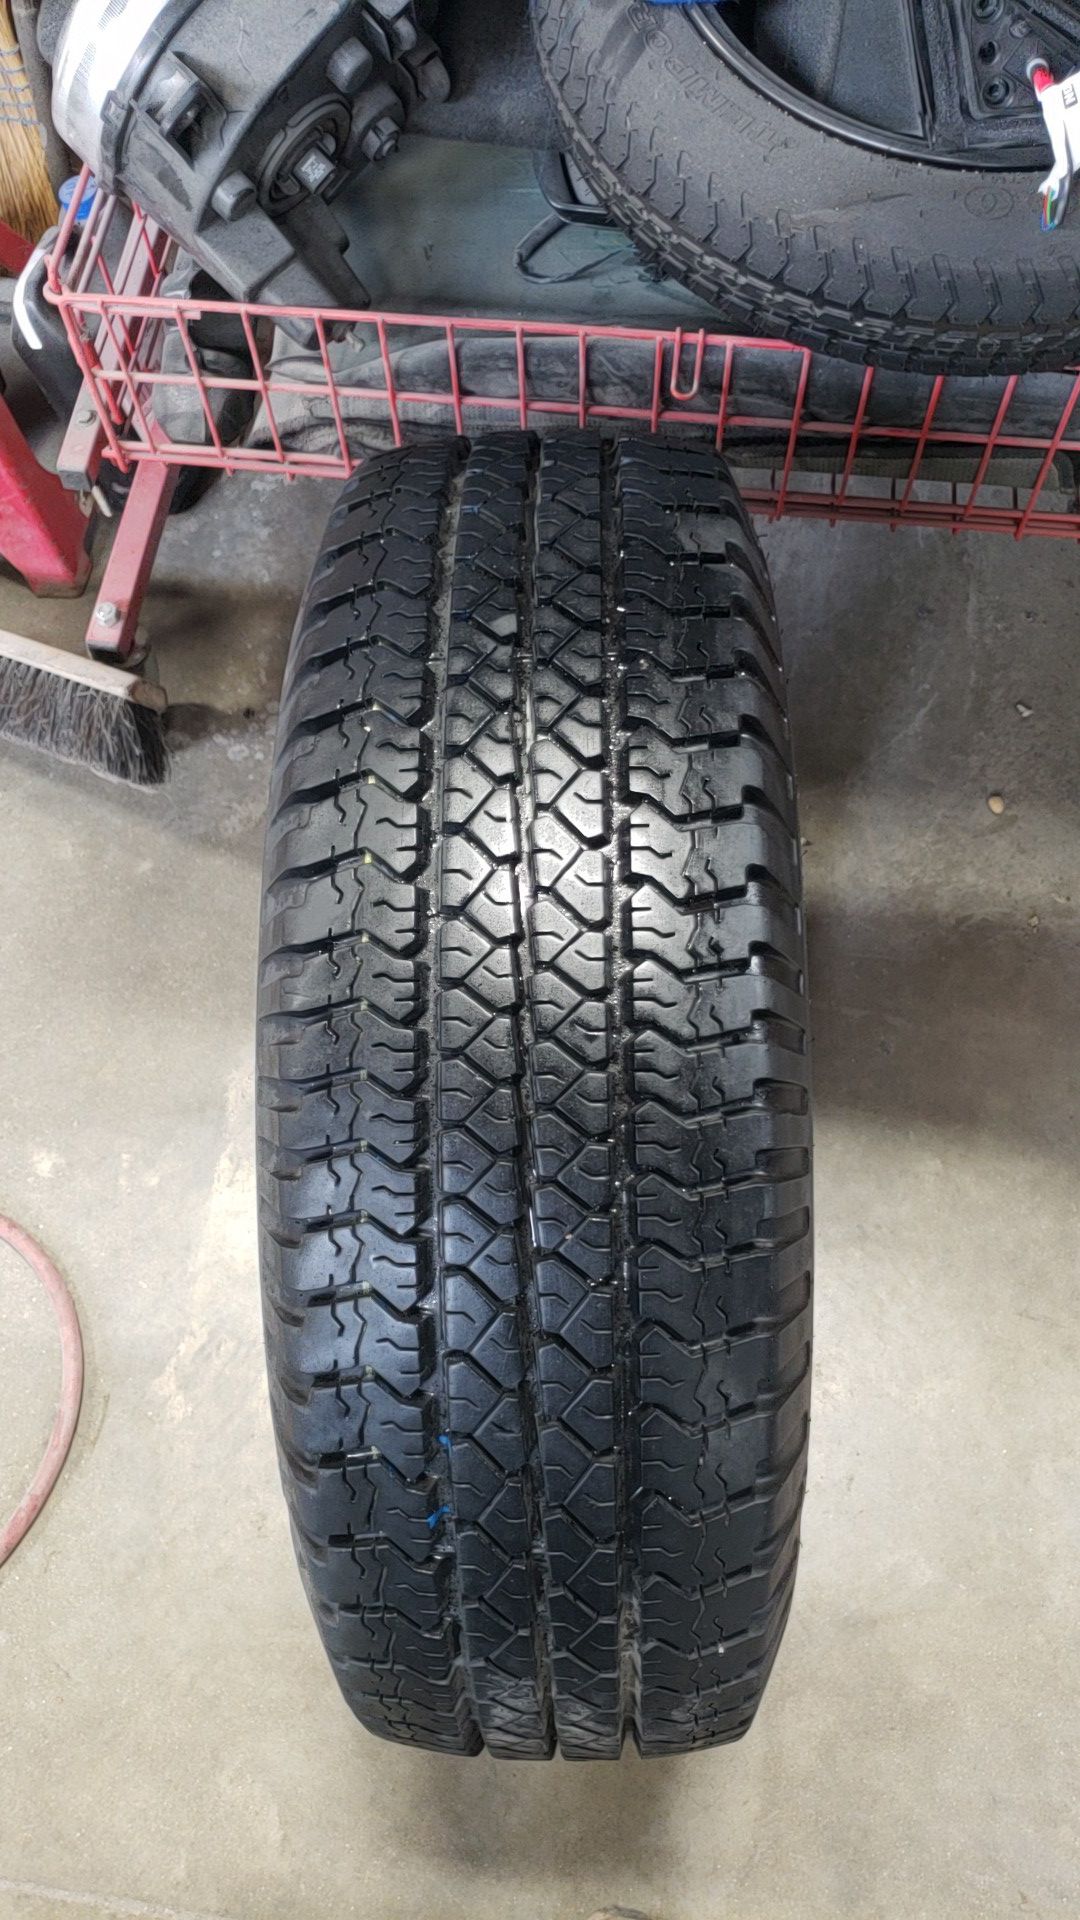 Goodyear wrangler RT/S P265/75R16 for Sale in Chicago, IL - OfferUp